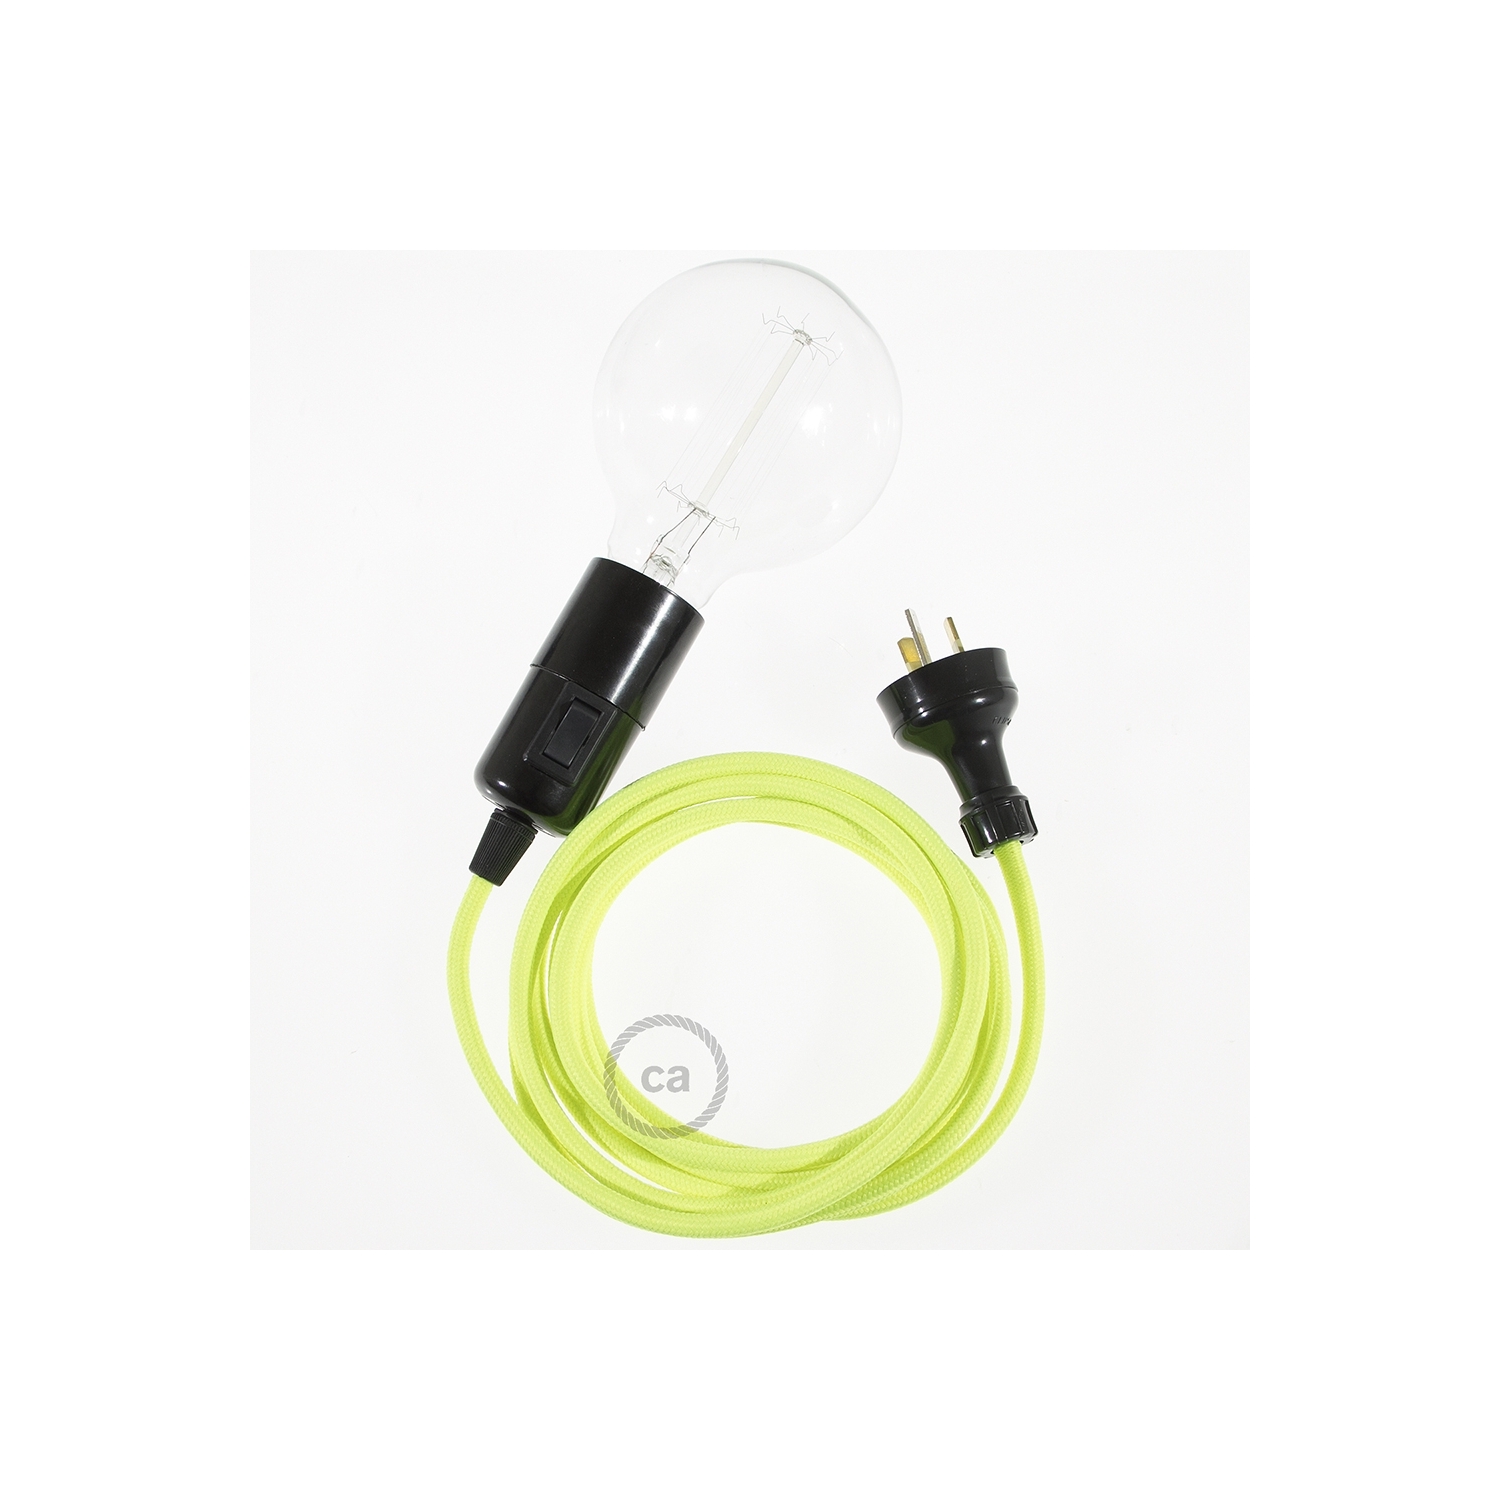 Create your RF10 Yellow Fluo Snake and bring the light wherever you want.